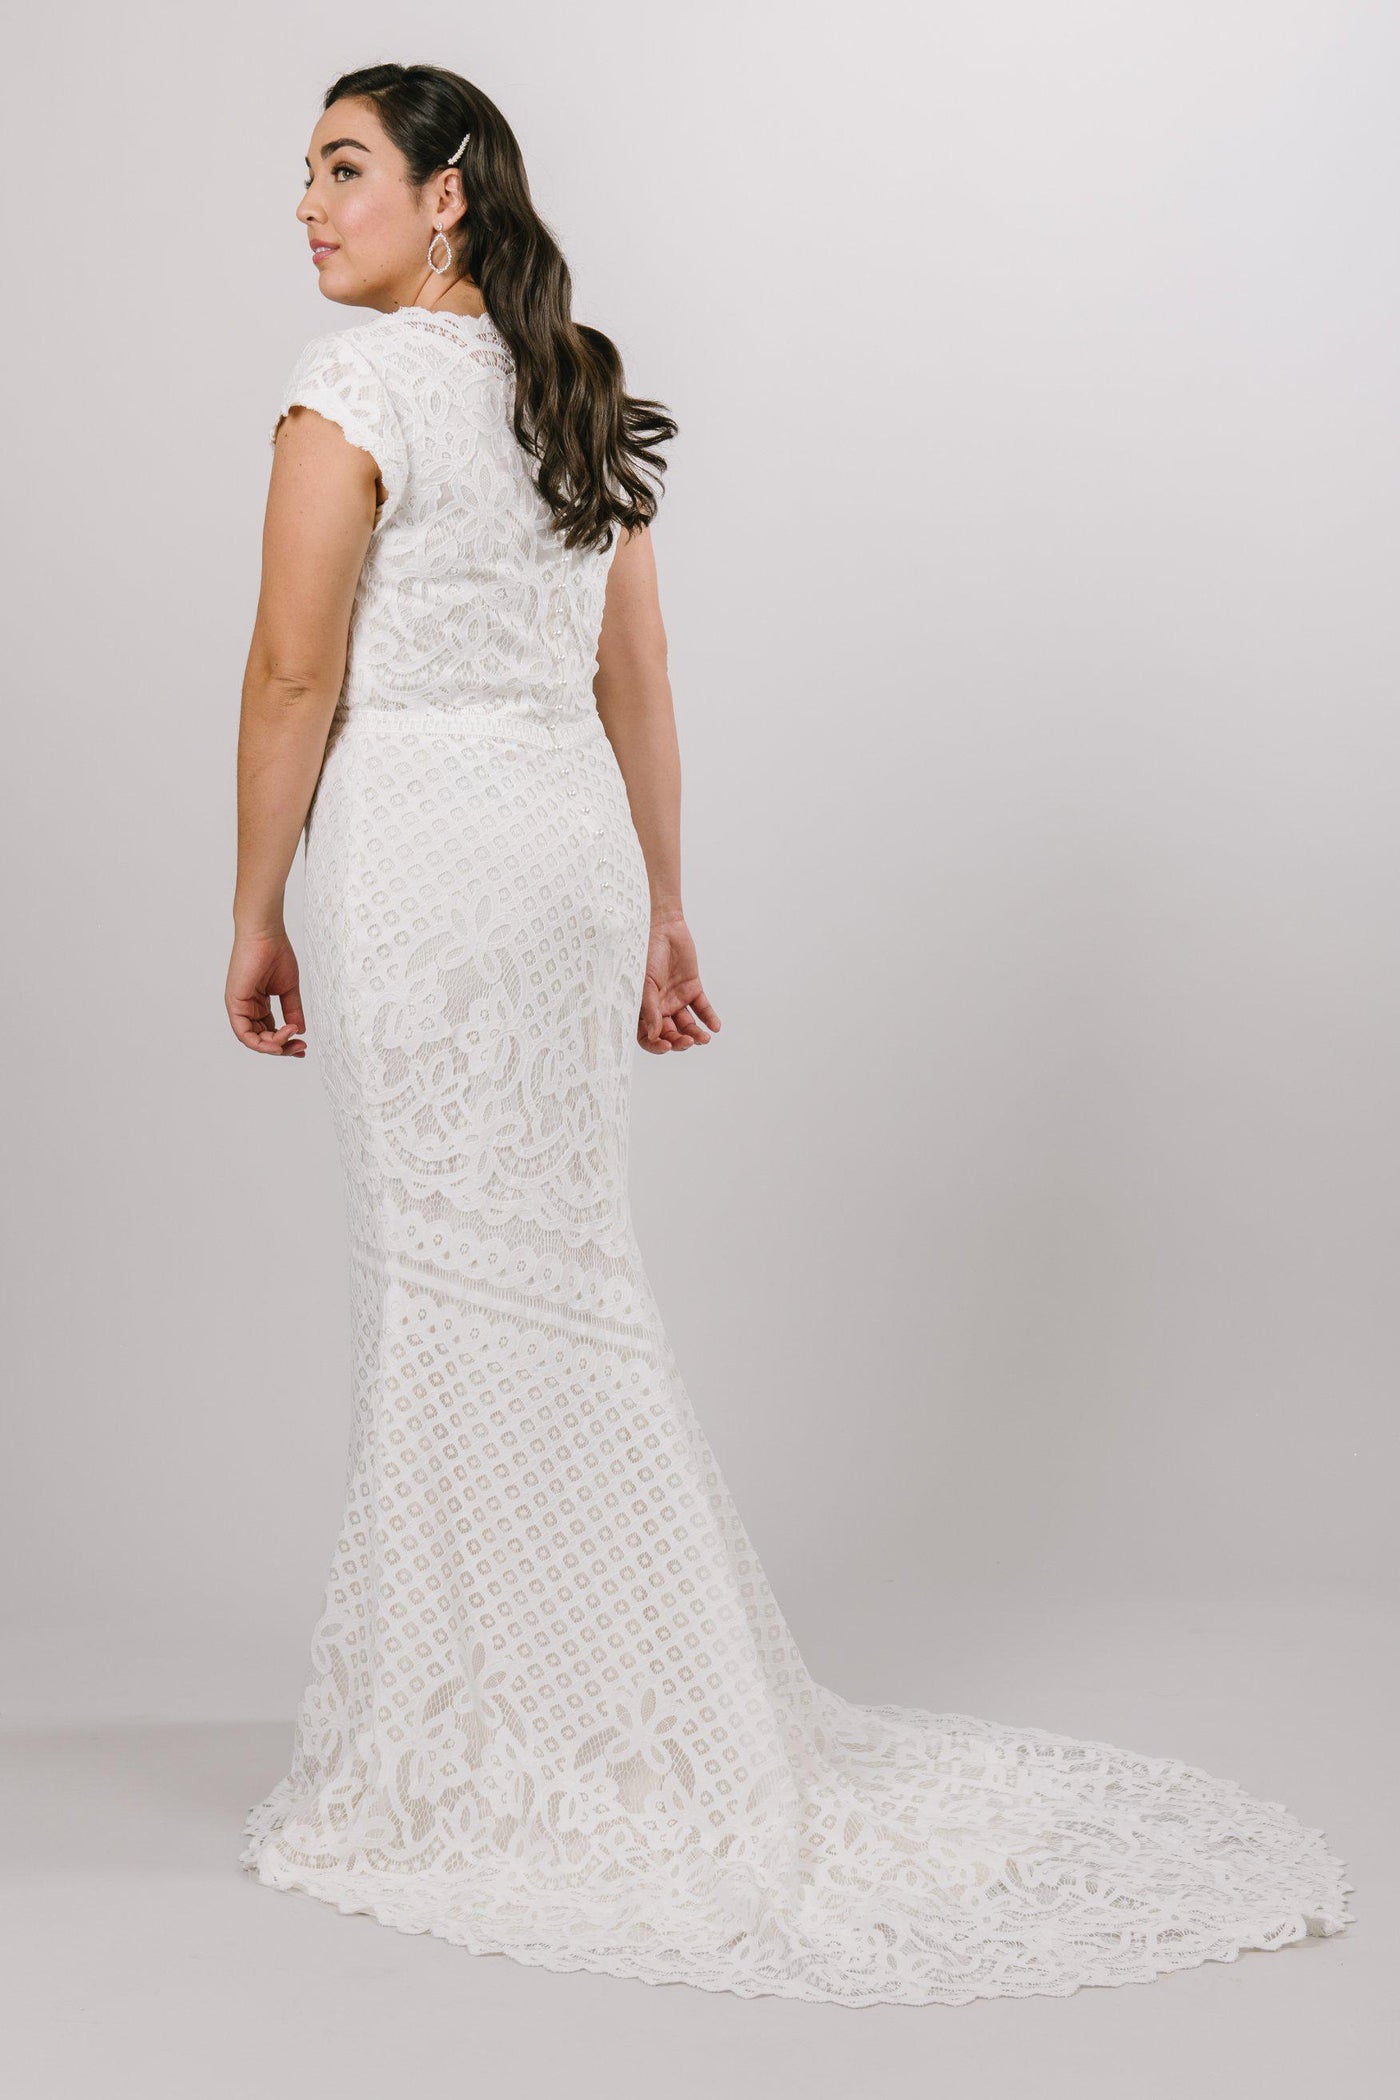 Boat neckline with delicate scalloped sleeves, style Luciana, is part of the Wedding Collection of LatterDayBride, a Salt Lake City bridal shop.